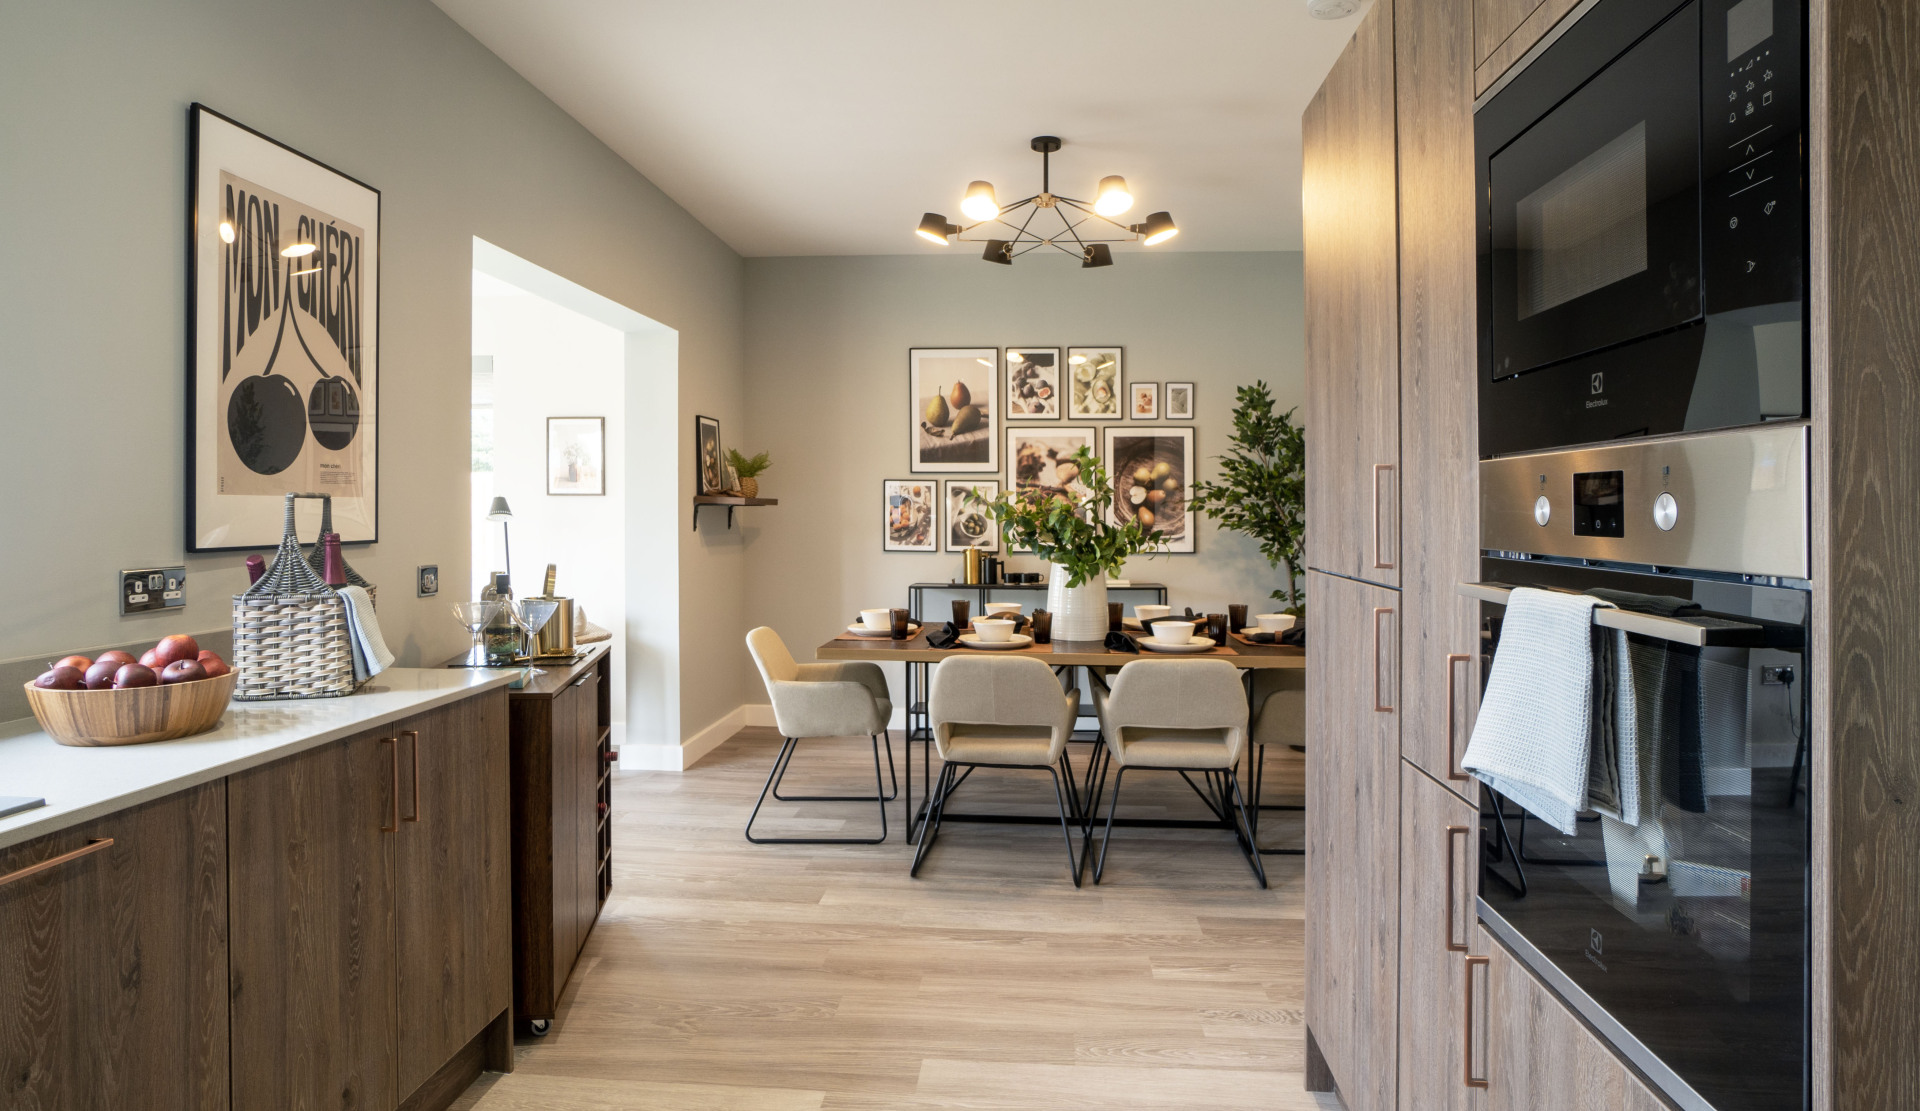 Dunrobin show home - kitchen dining area